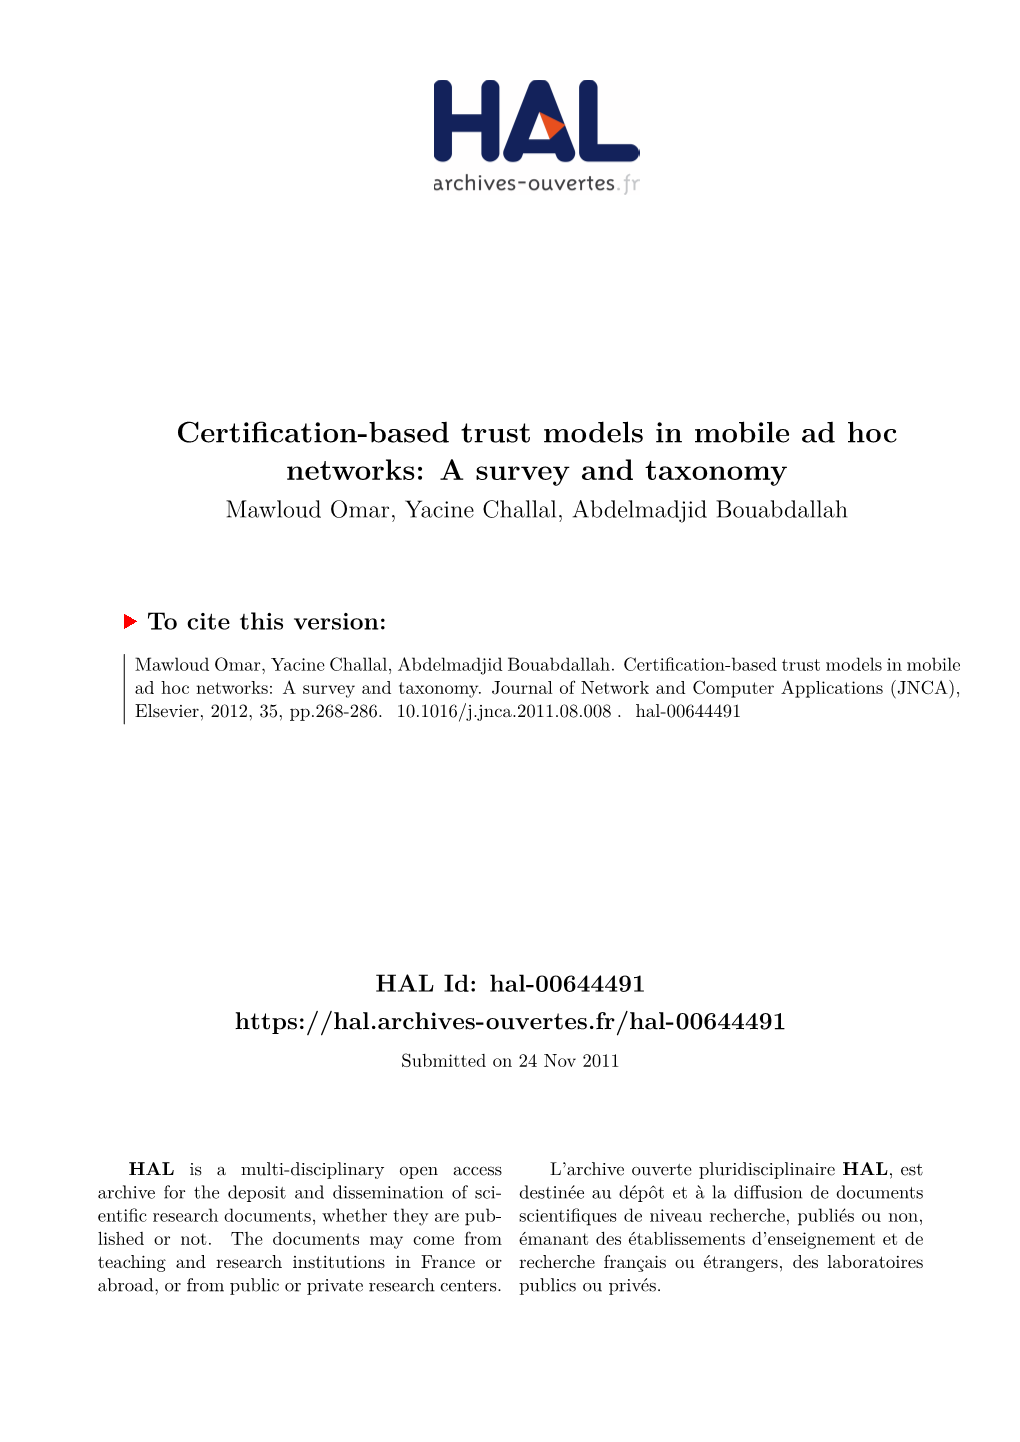 Certification-Based Trust Models in Mobile Ad Hoc Networks: a Survey and Taxonomy Mawloud Omar, Yacine Challal, Abdelmadjid Bouabdallah